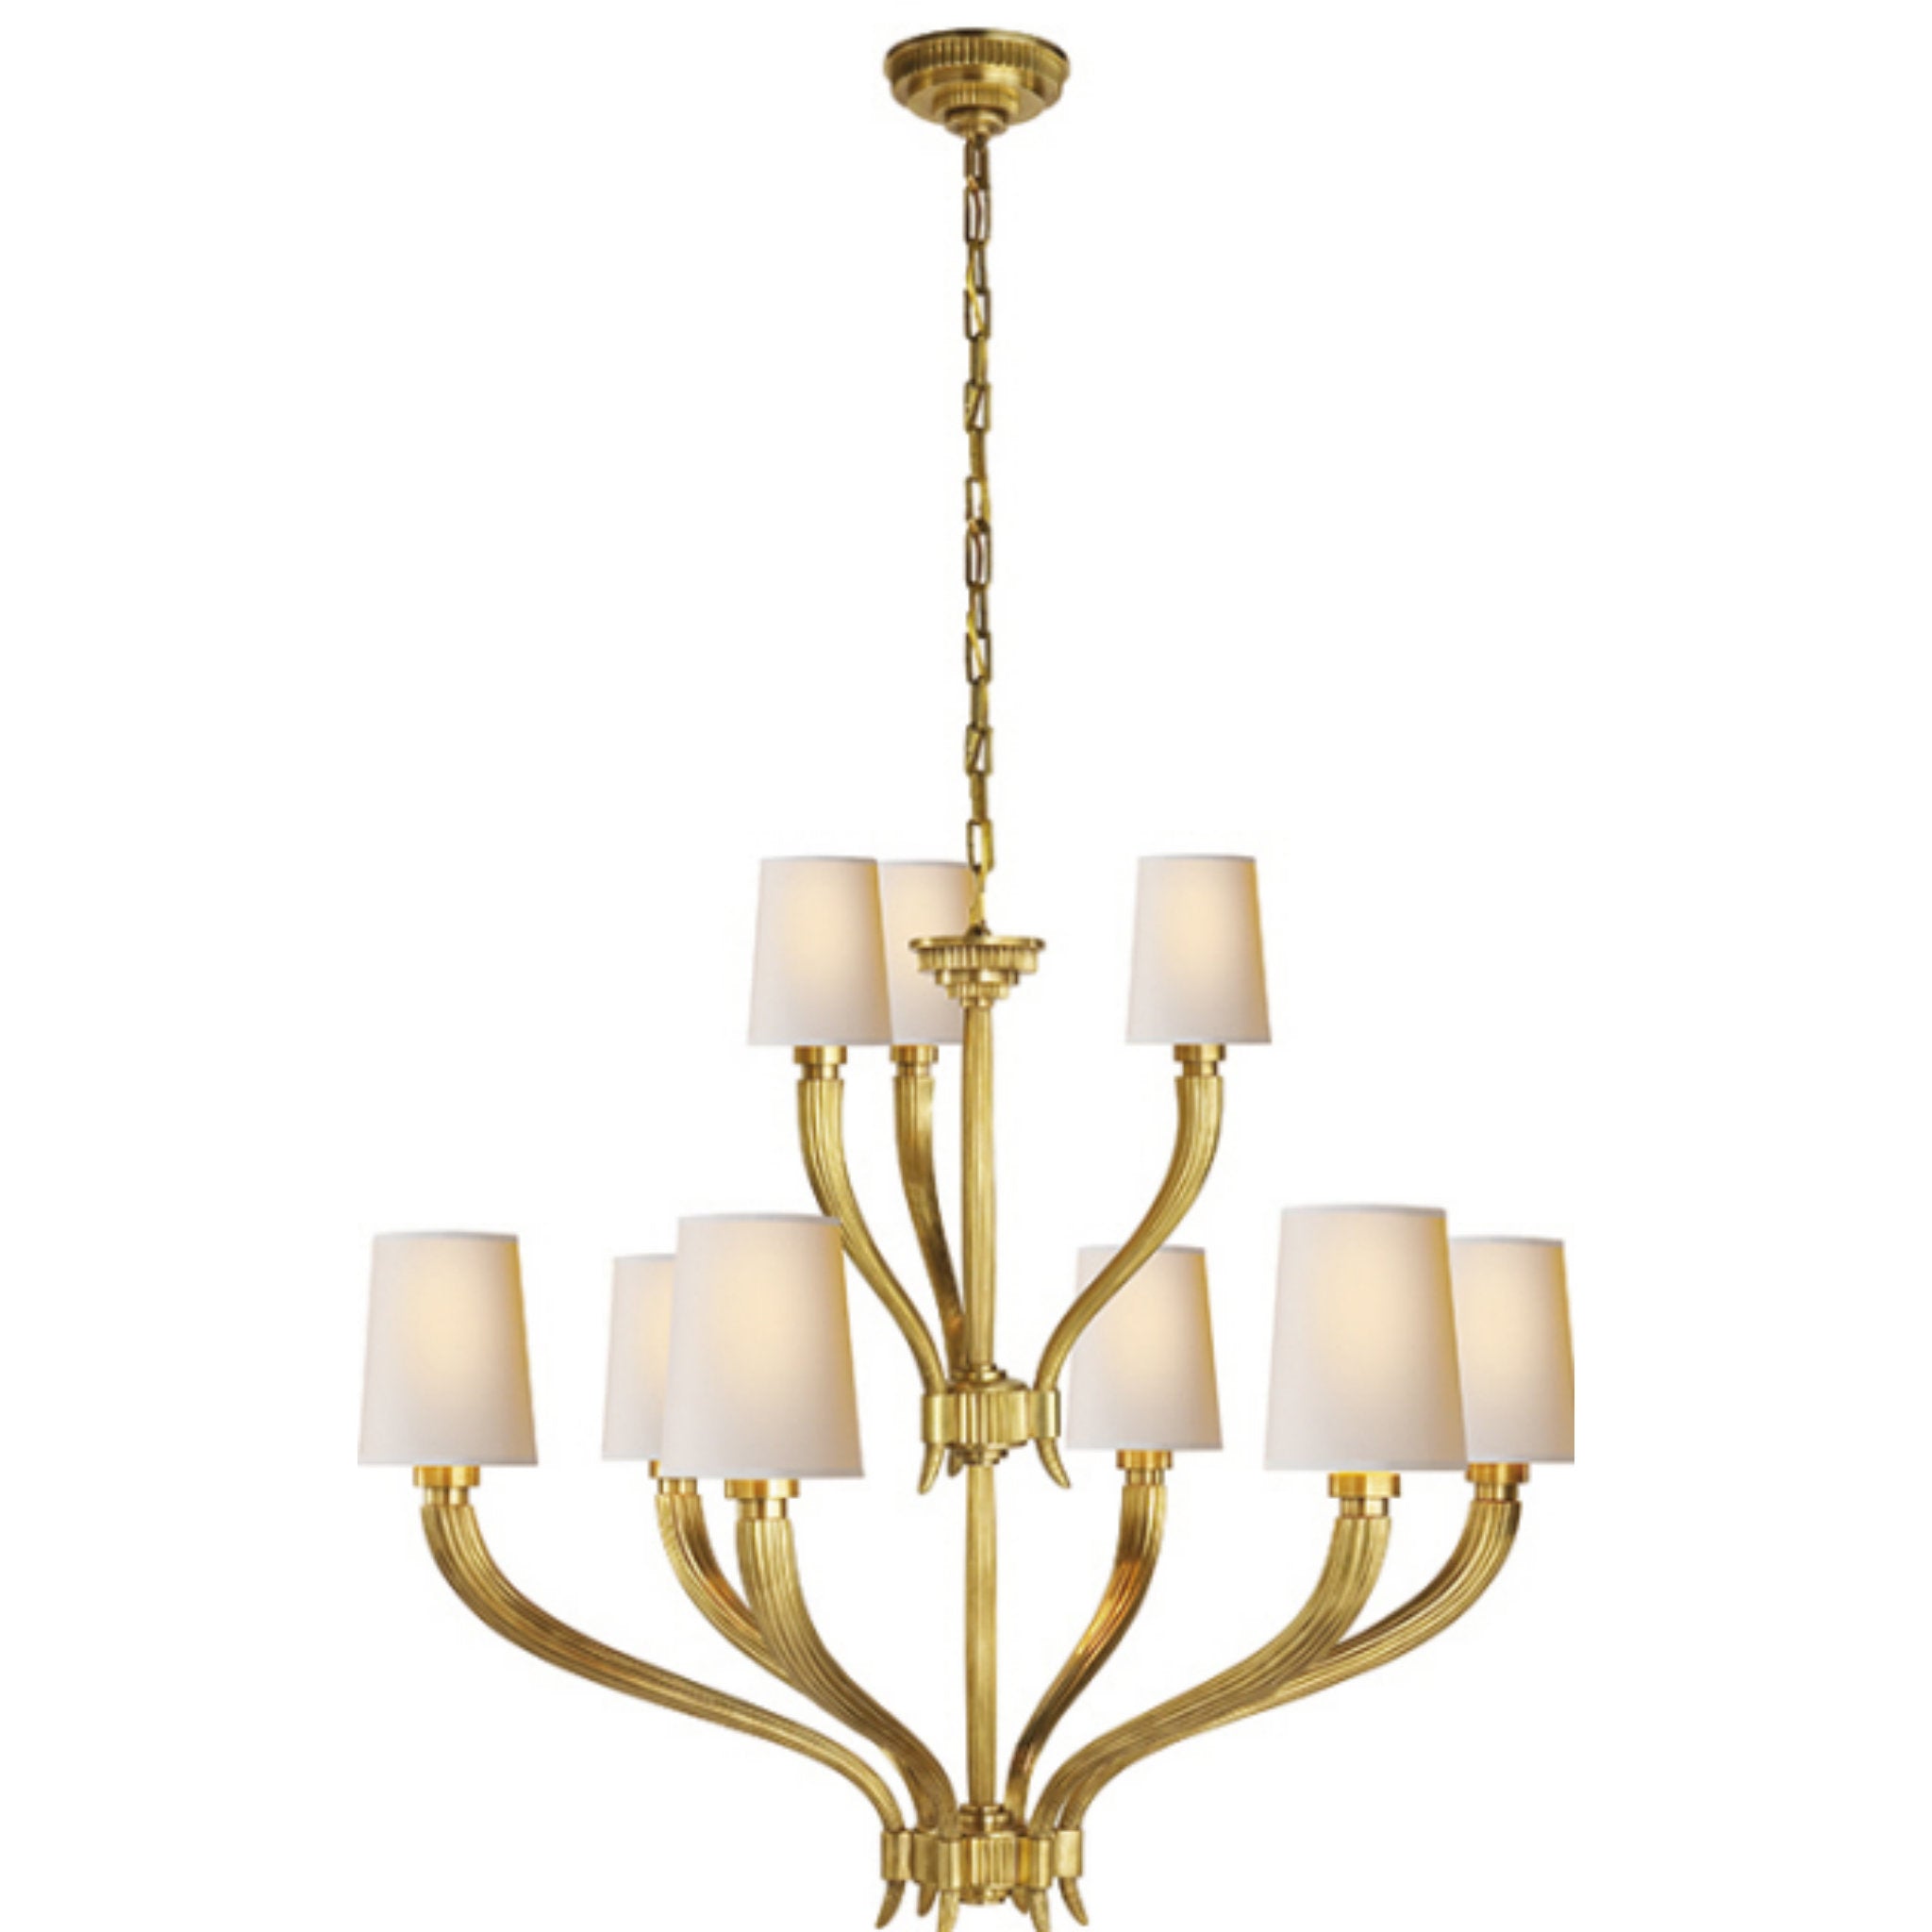 Chapman & Myers Classic Two-Tier Ring Chandelier in Hand-Rubbed Antiqu